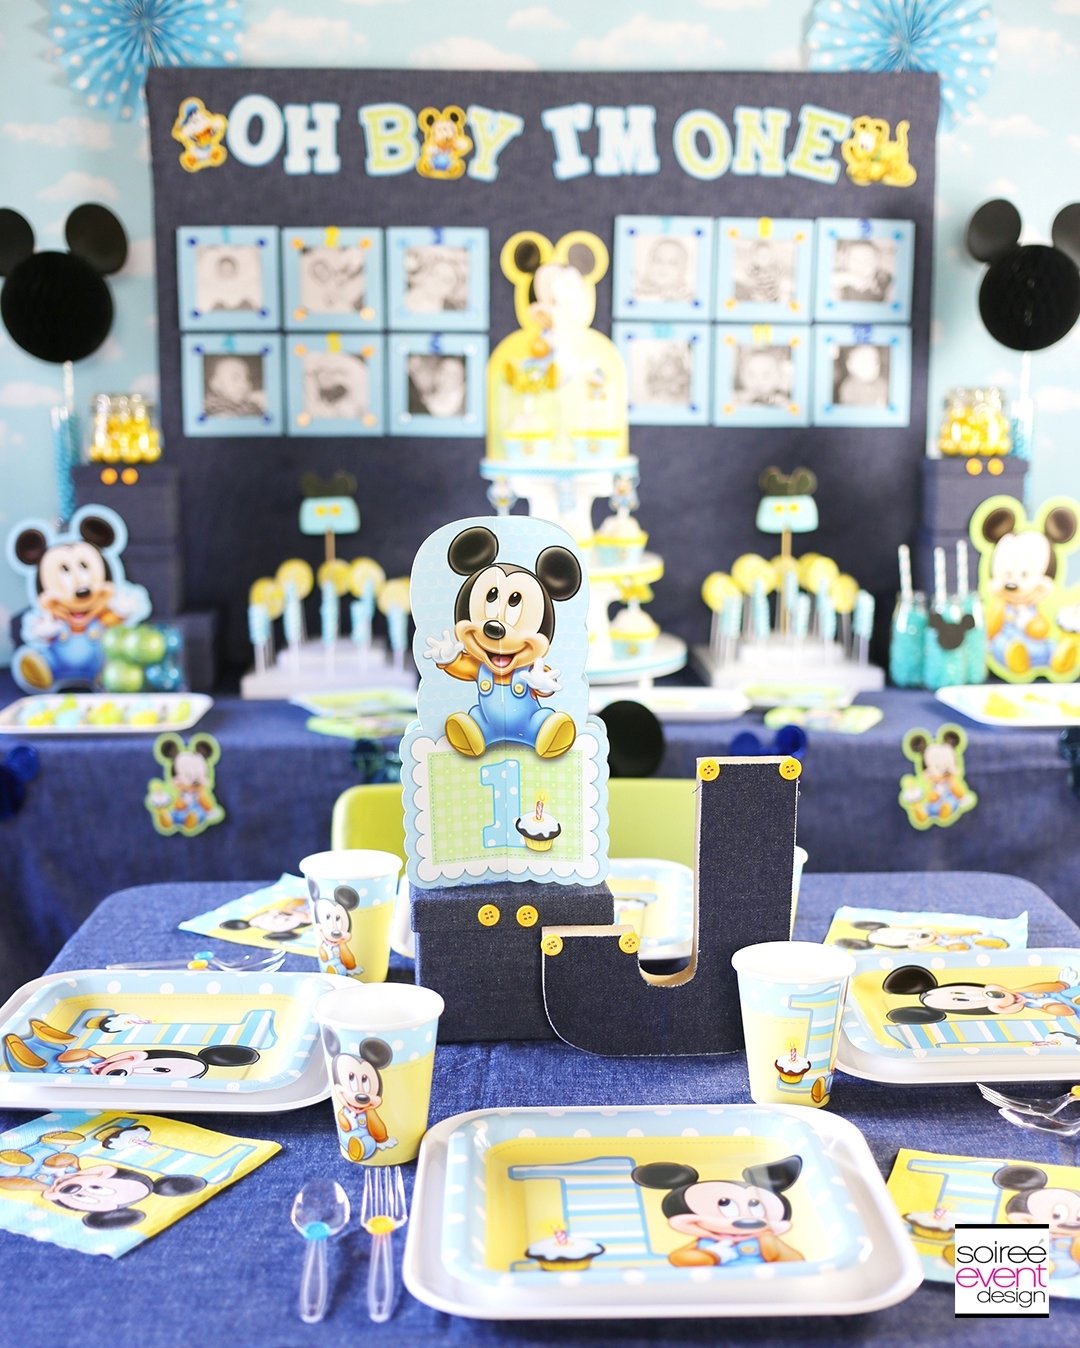 10 Ideal Birthday Party Ideas For 1 Year Old Boy nonsensical 1 year old birthday party game ideas themes together 1 2022